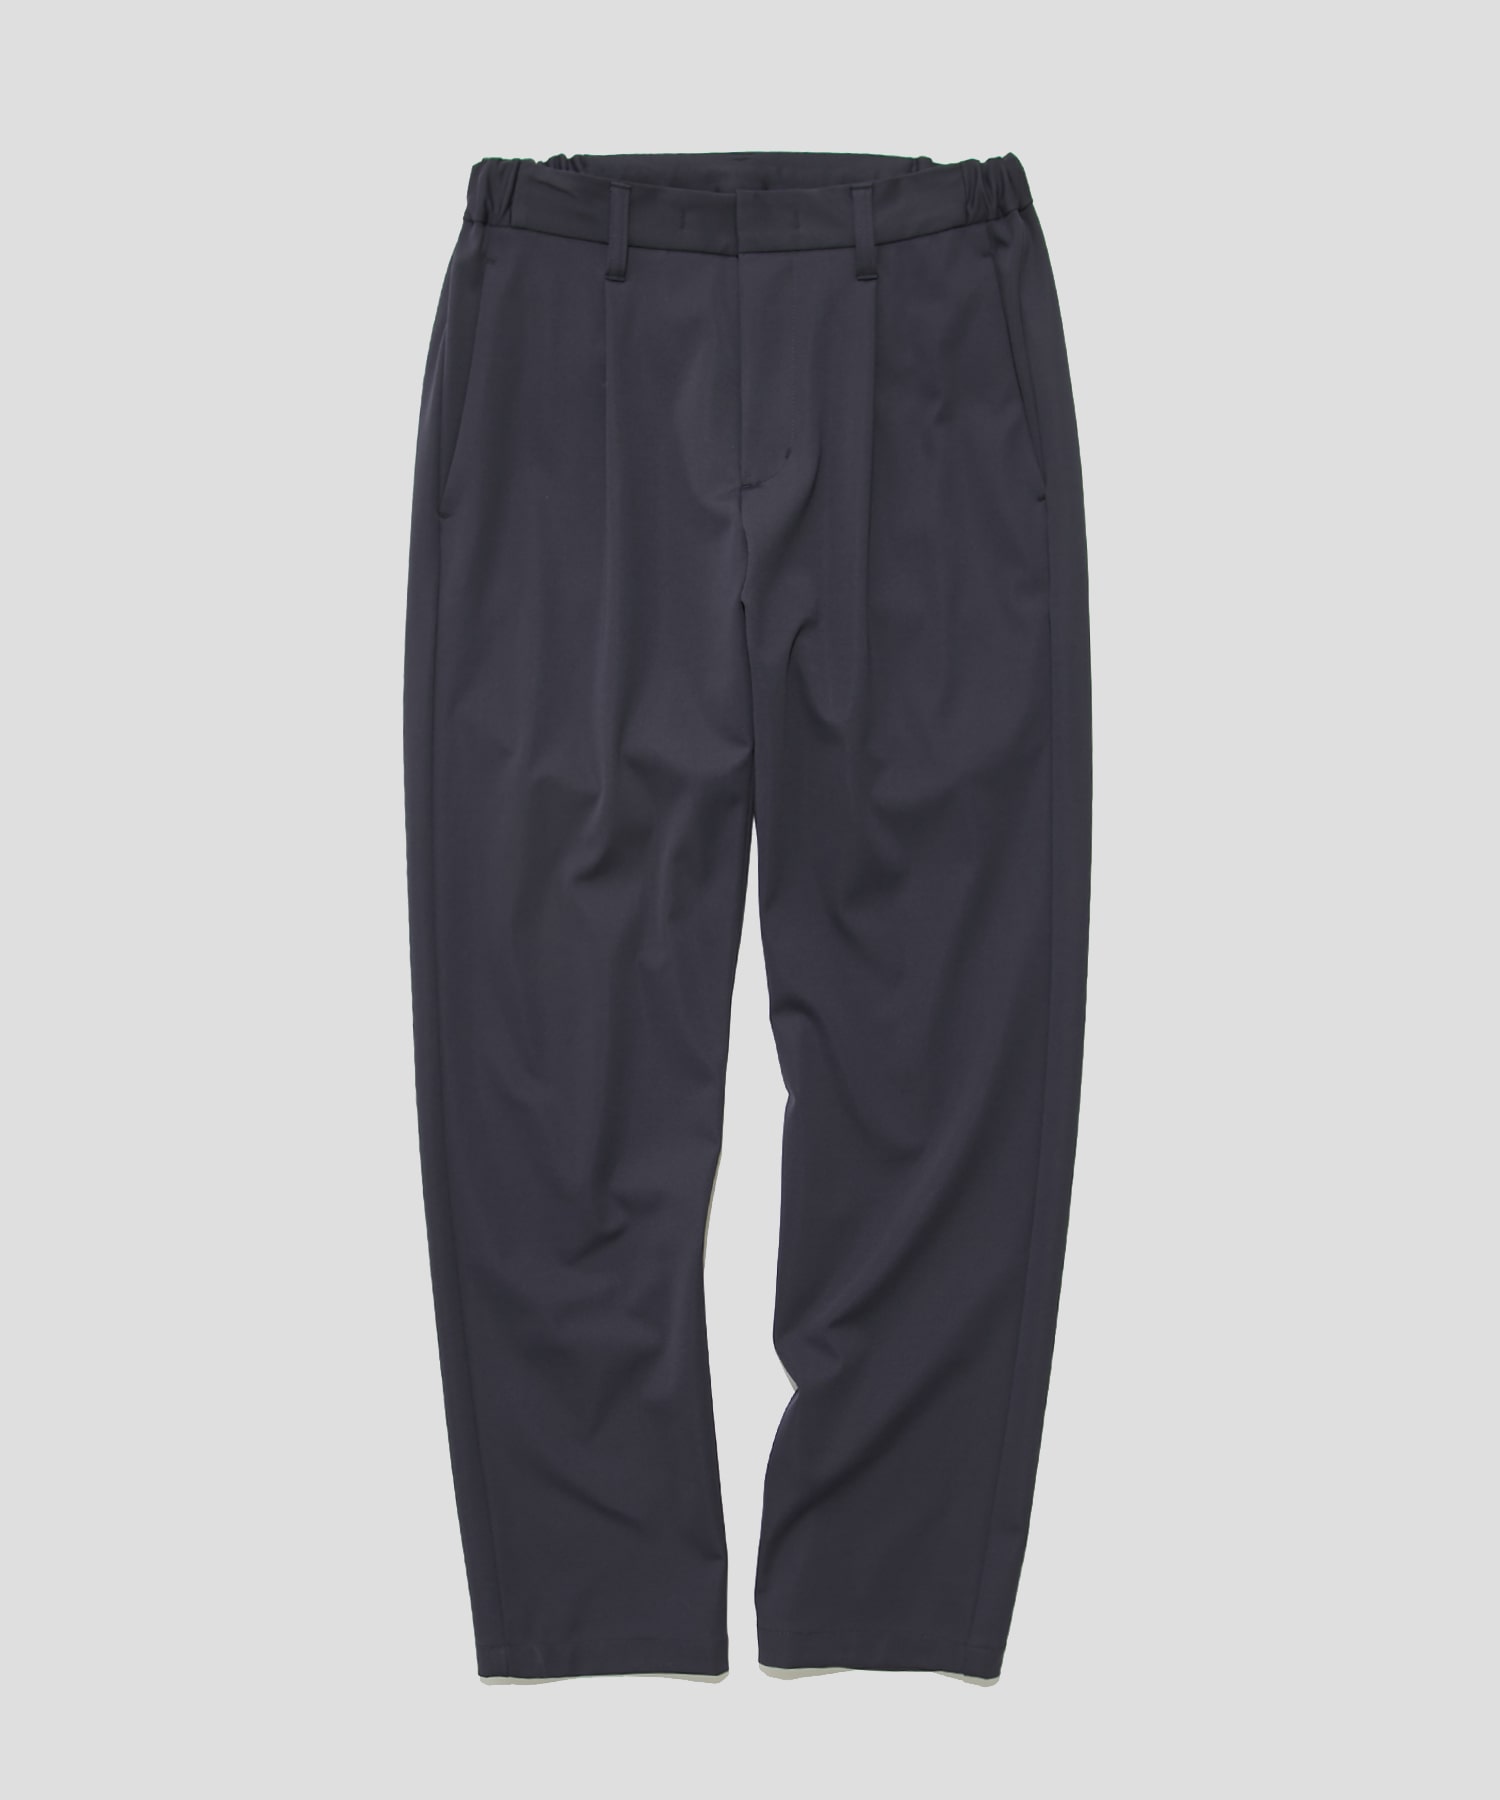 Washable High Function Jersey Tapered Pants(44 BLACK): THE TOKYO